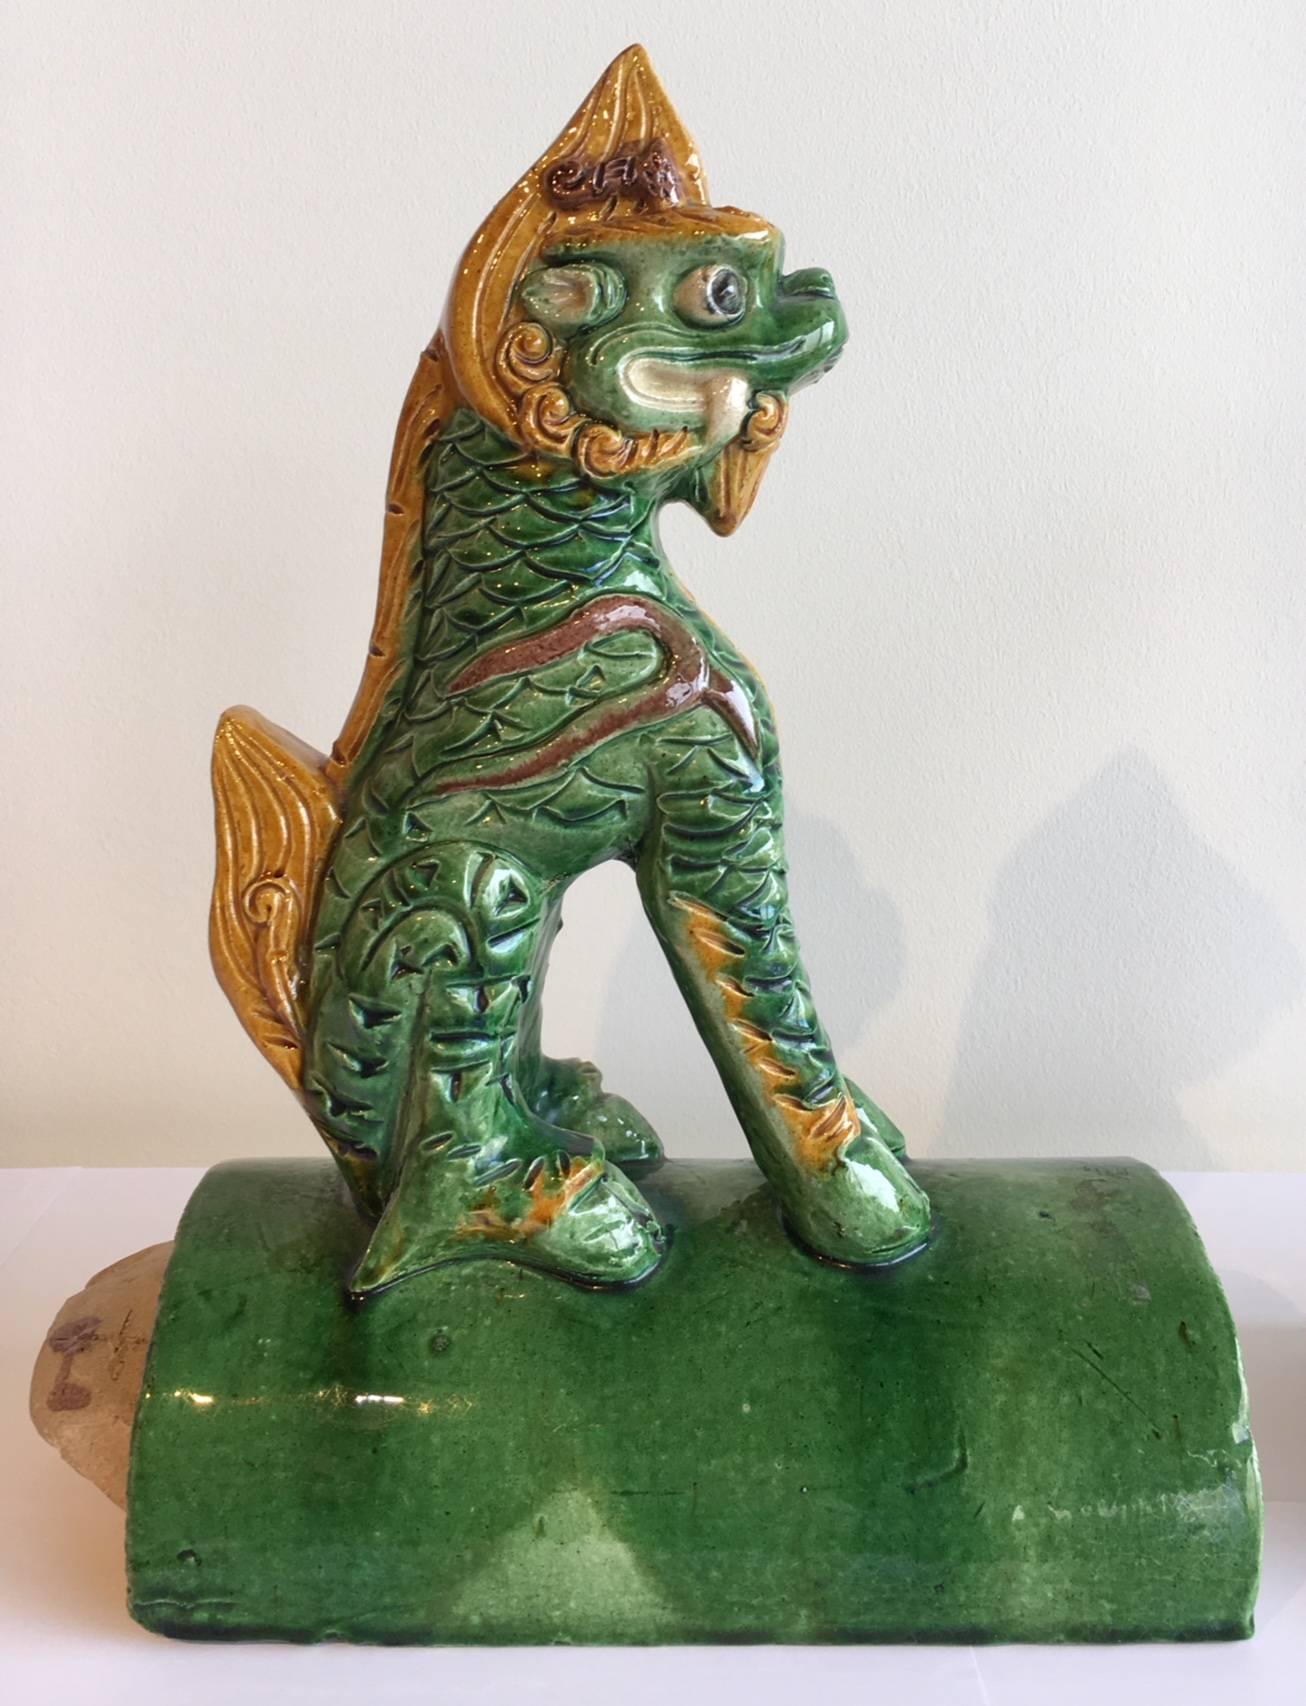 Pair of antique Chinese “foo dogs” roof tiles. 
Rare pair of foo dog tiles in stunning green and yellow gold from the late 19th century.

Size: H: 13.75